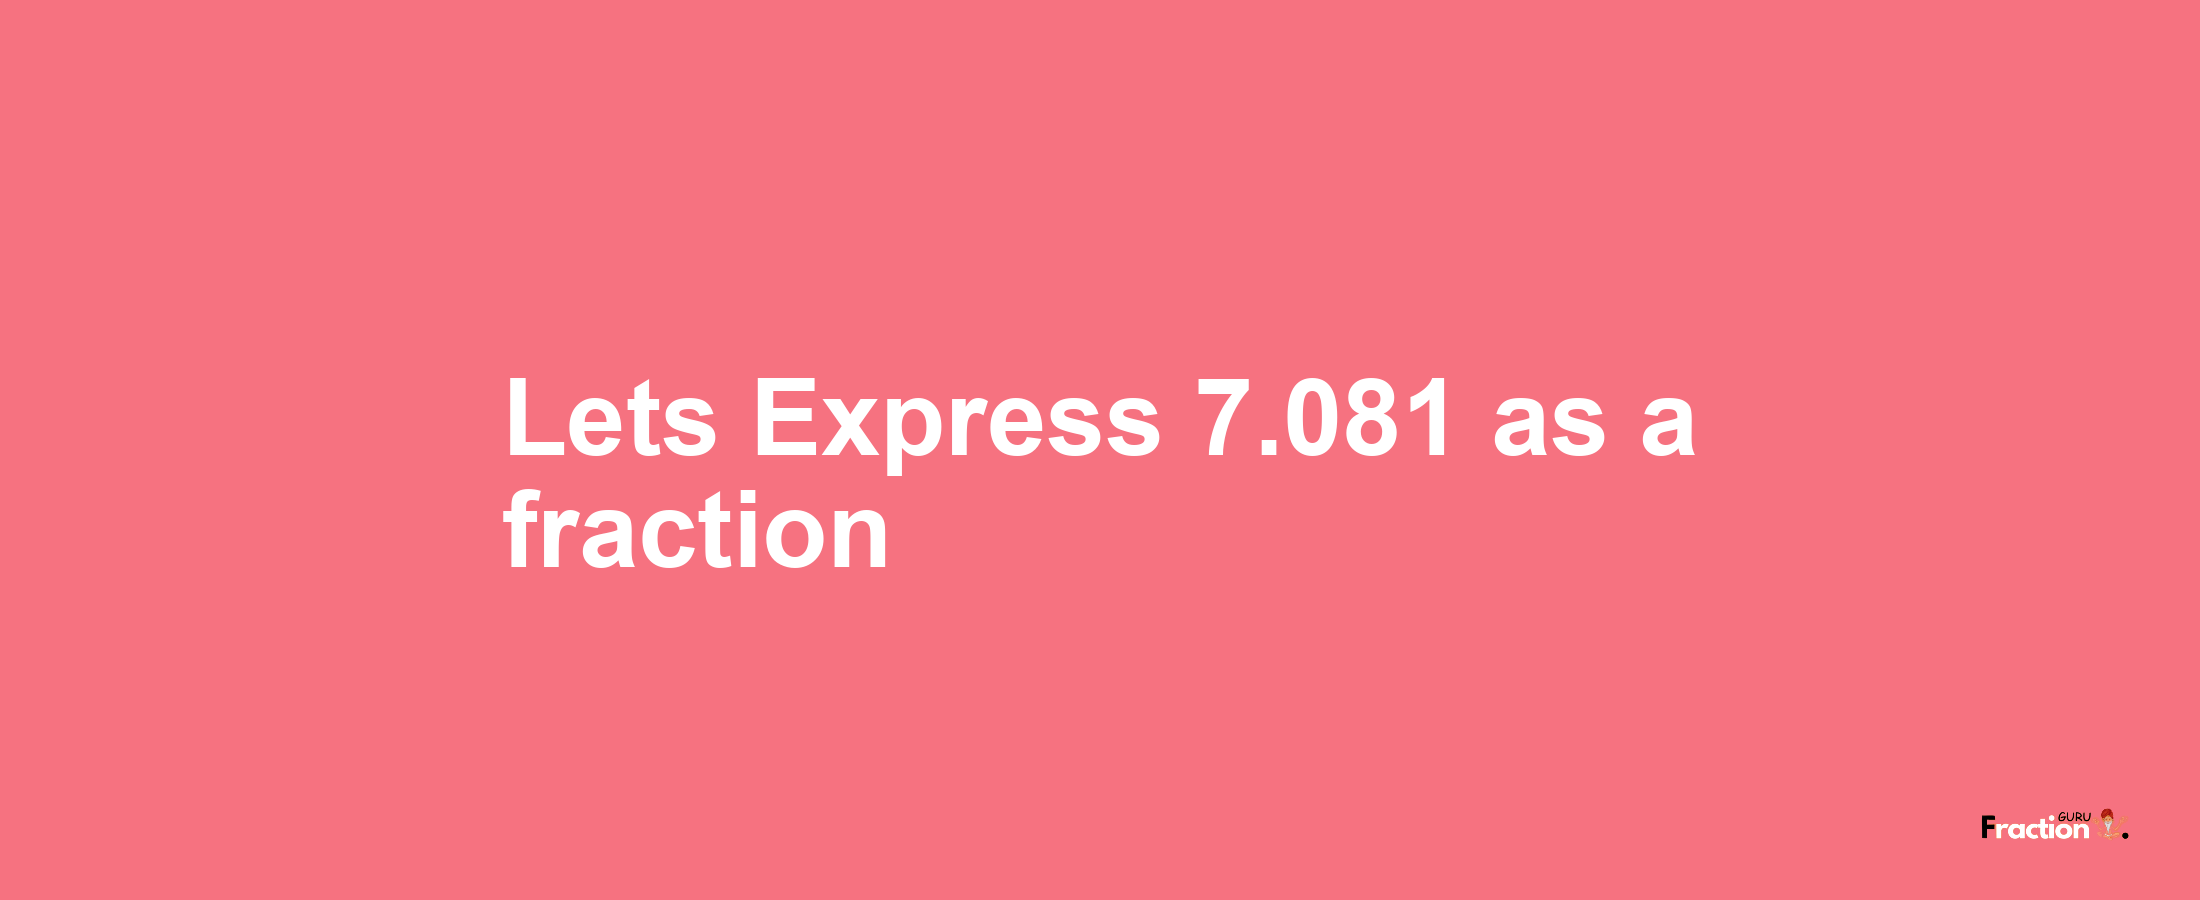 Lets Express 7.081 as afraction